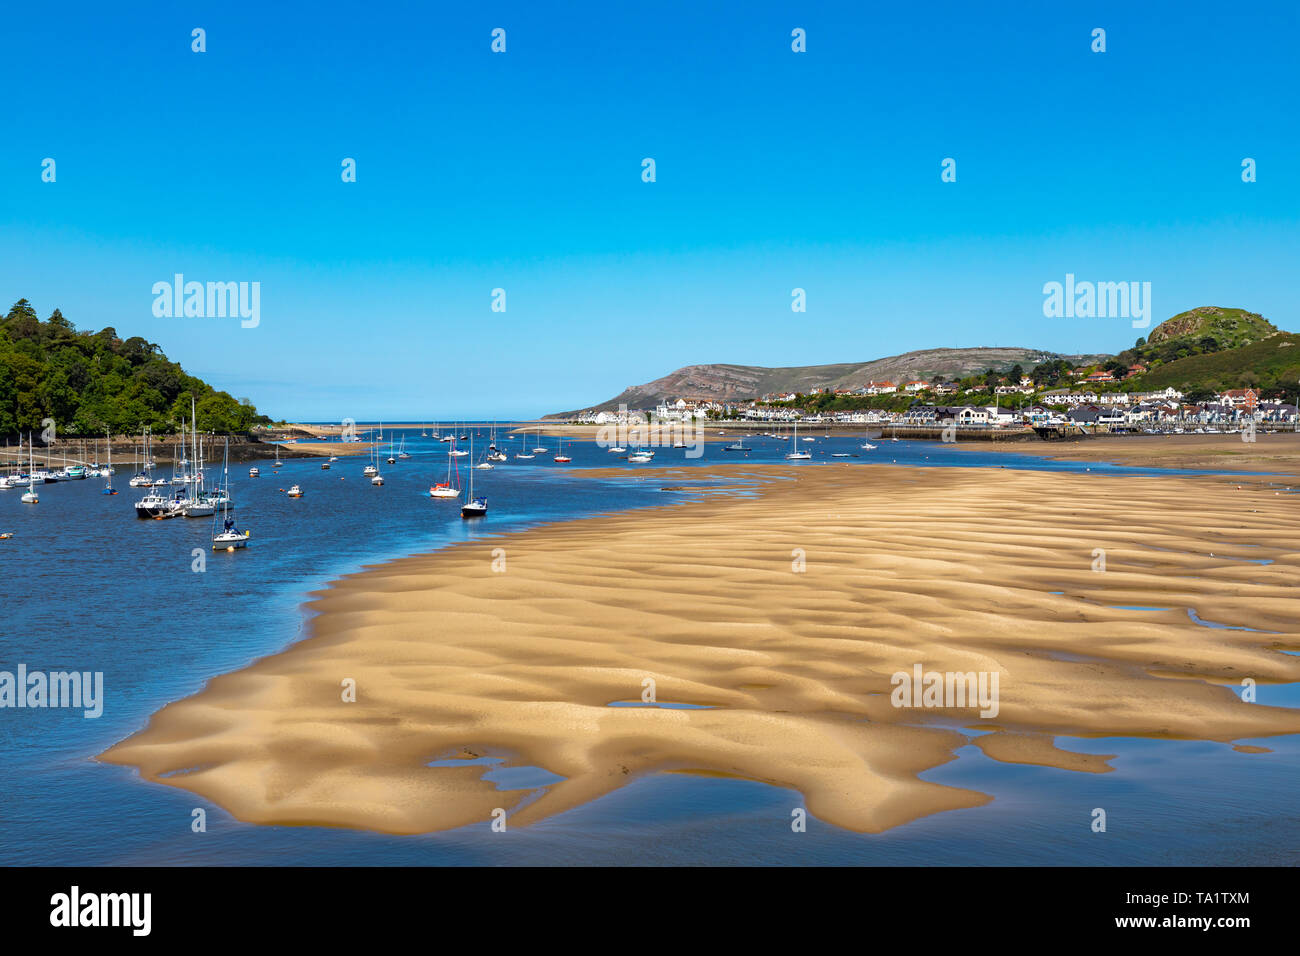 Conwy Wales The estuary of the river Conwy at Low tide May 12, 2019 Stock Photo